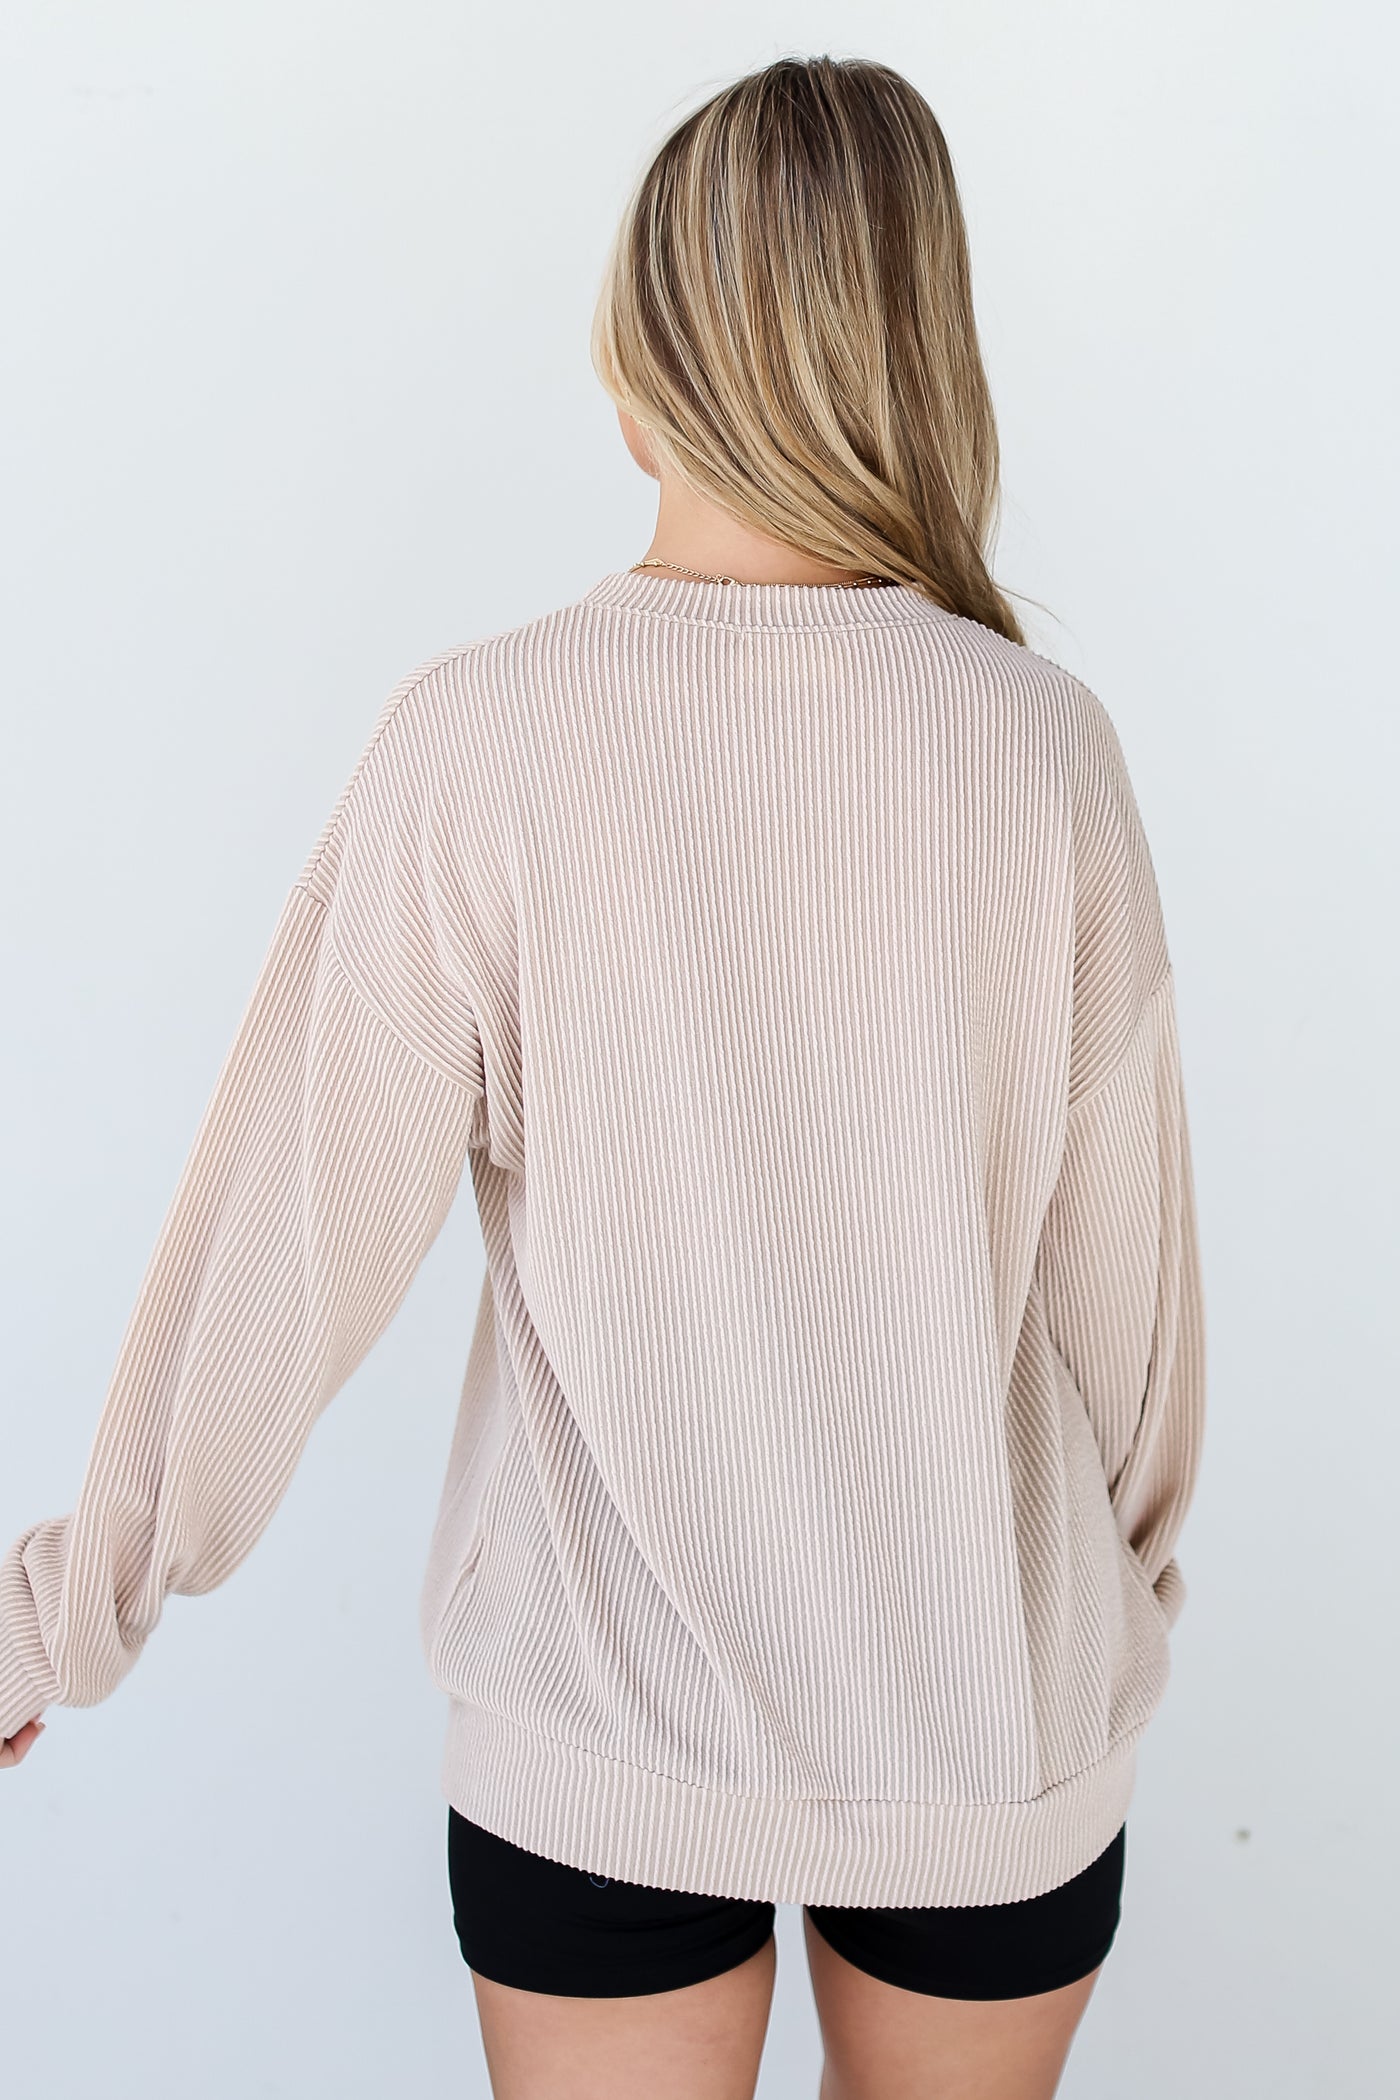 Oatmeal Corded Pullover back view